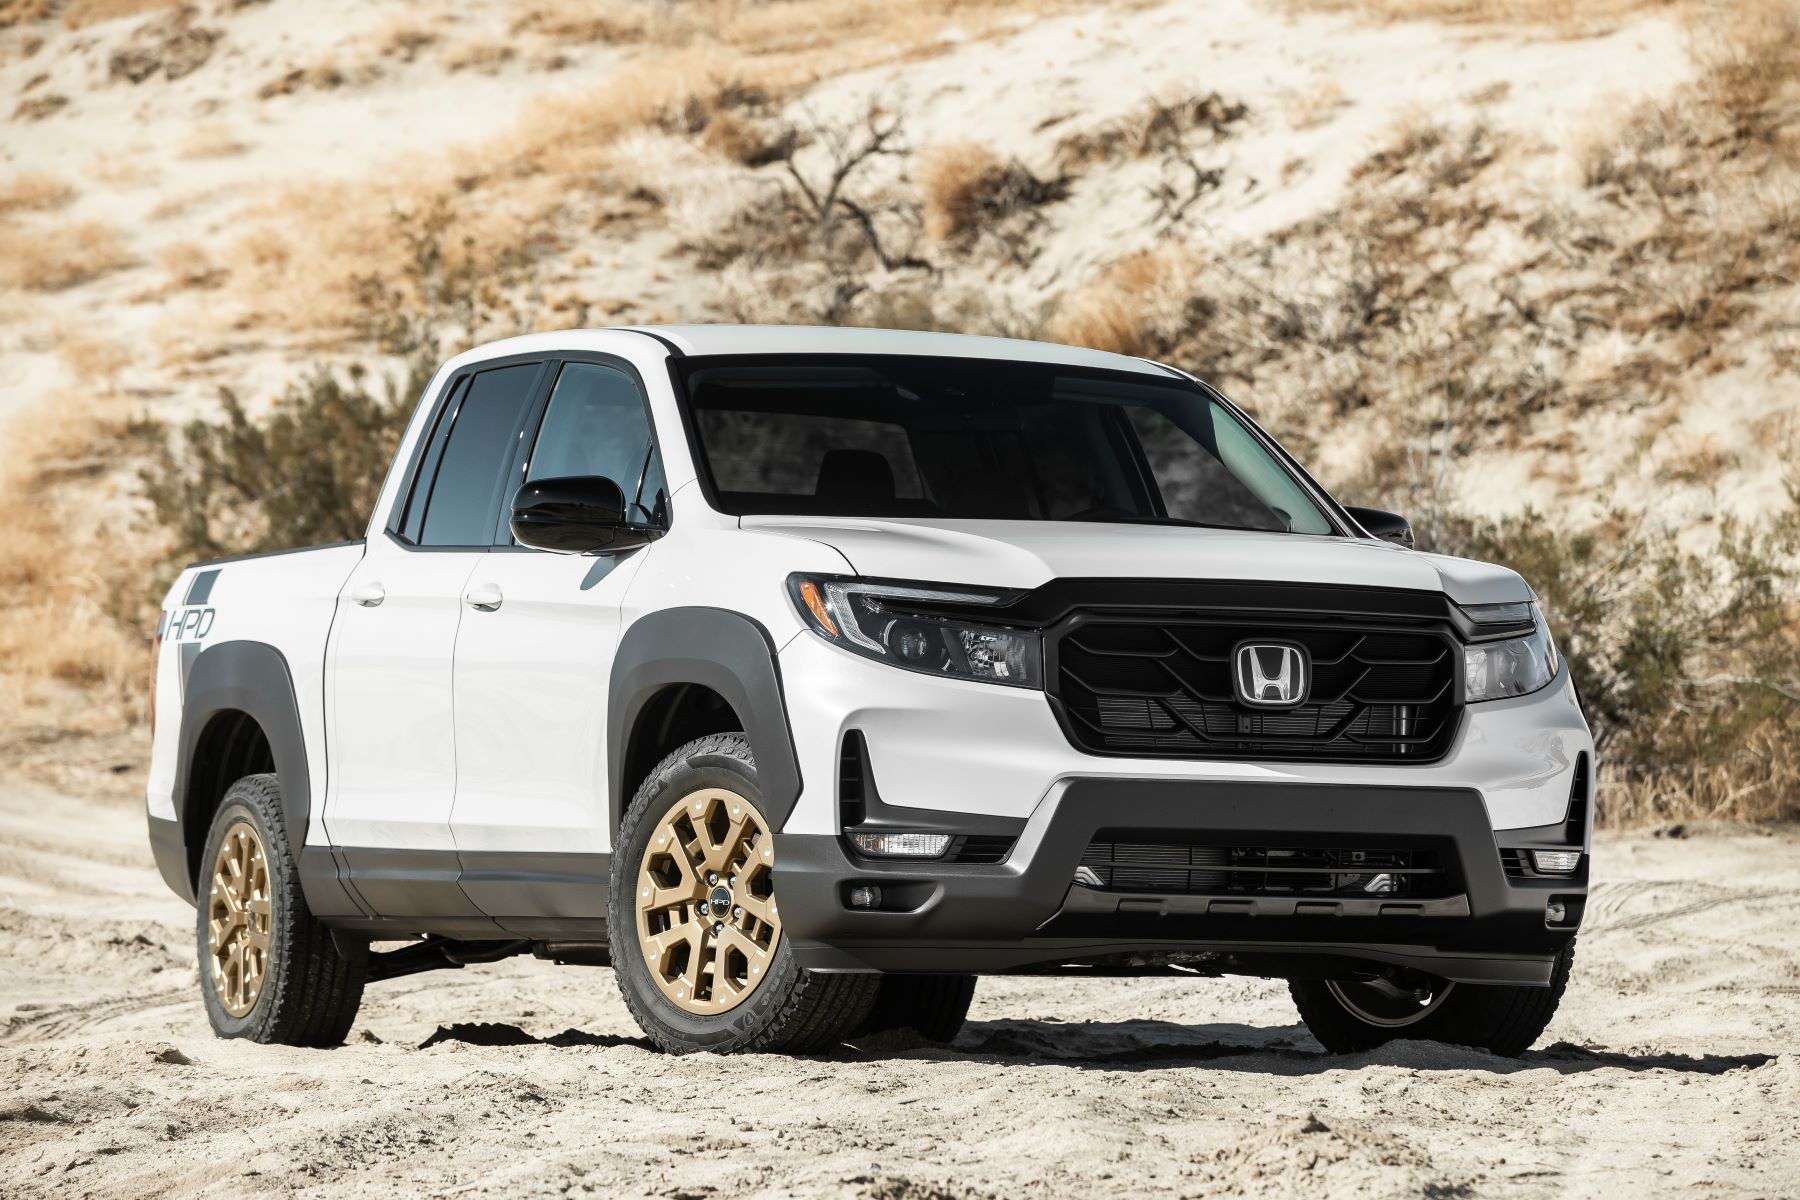 A 2022 Honda Ridgeline Sport unibody midsize pickup truck with the HPD Package parked in the middle of a desert